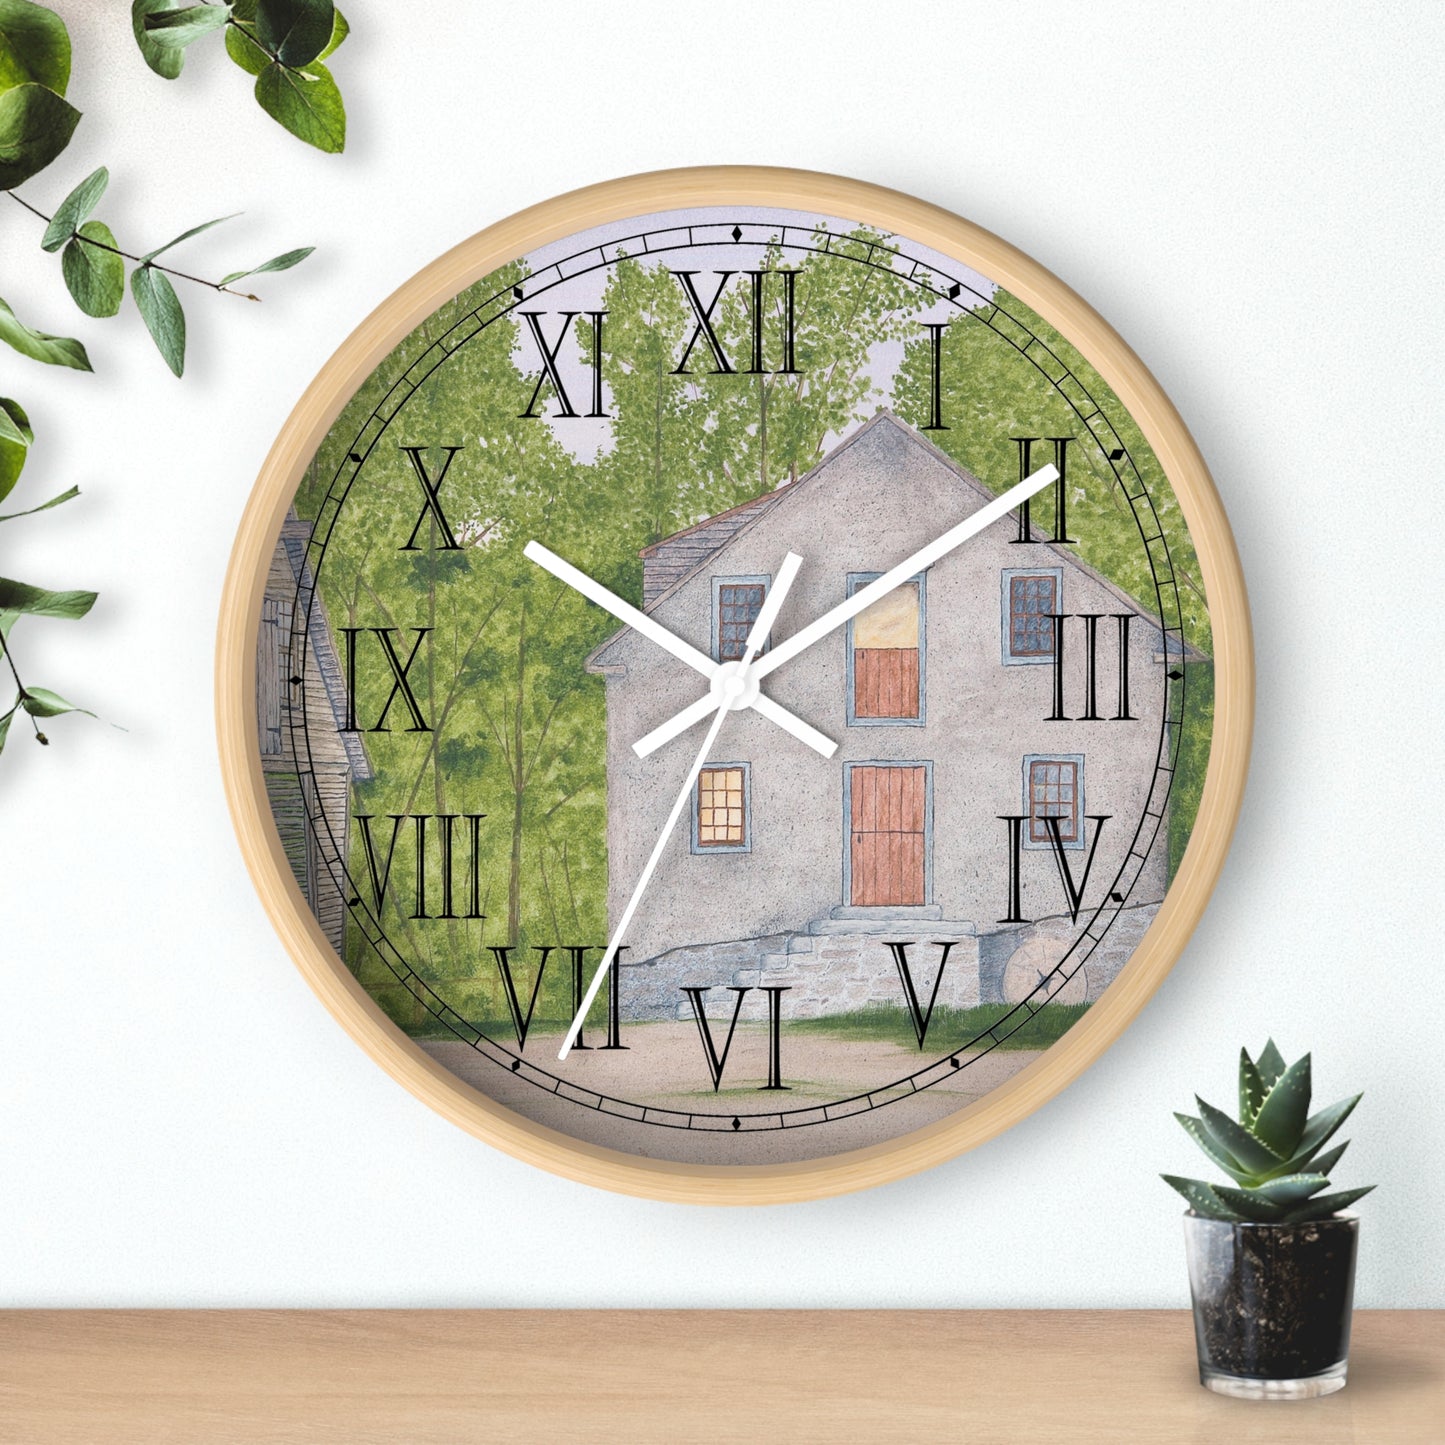 Long Day At The Mill Roman Numeral Clock